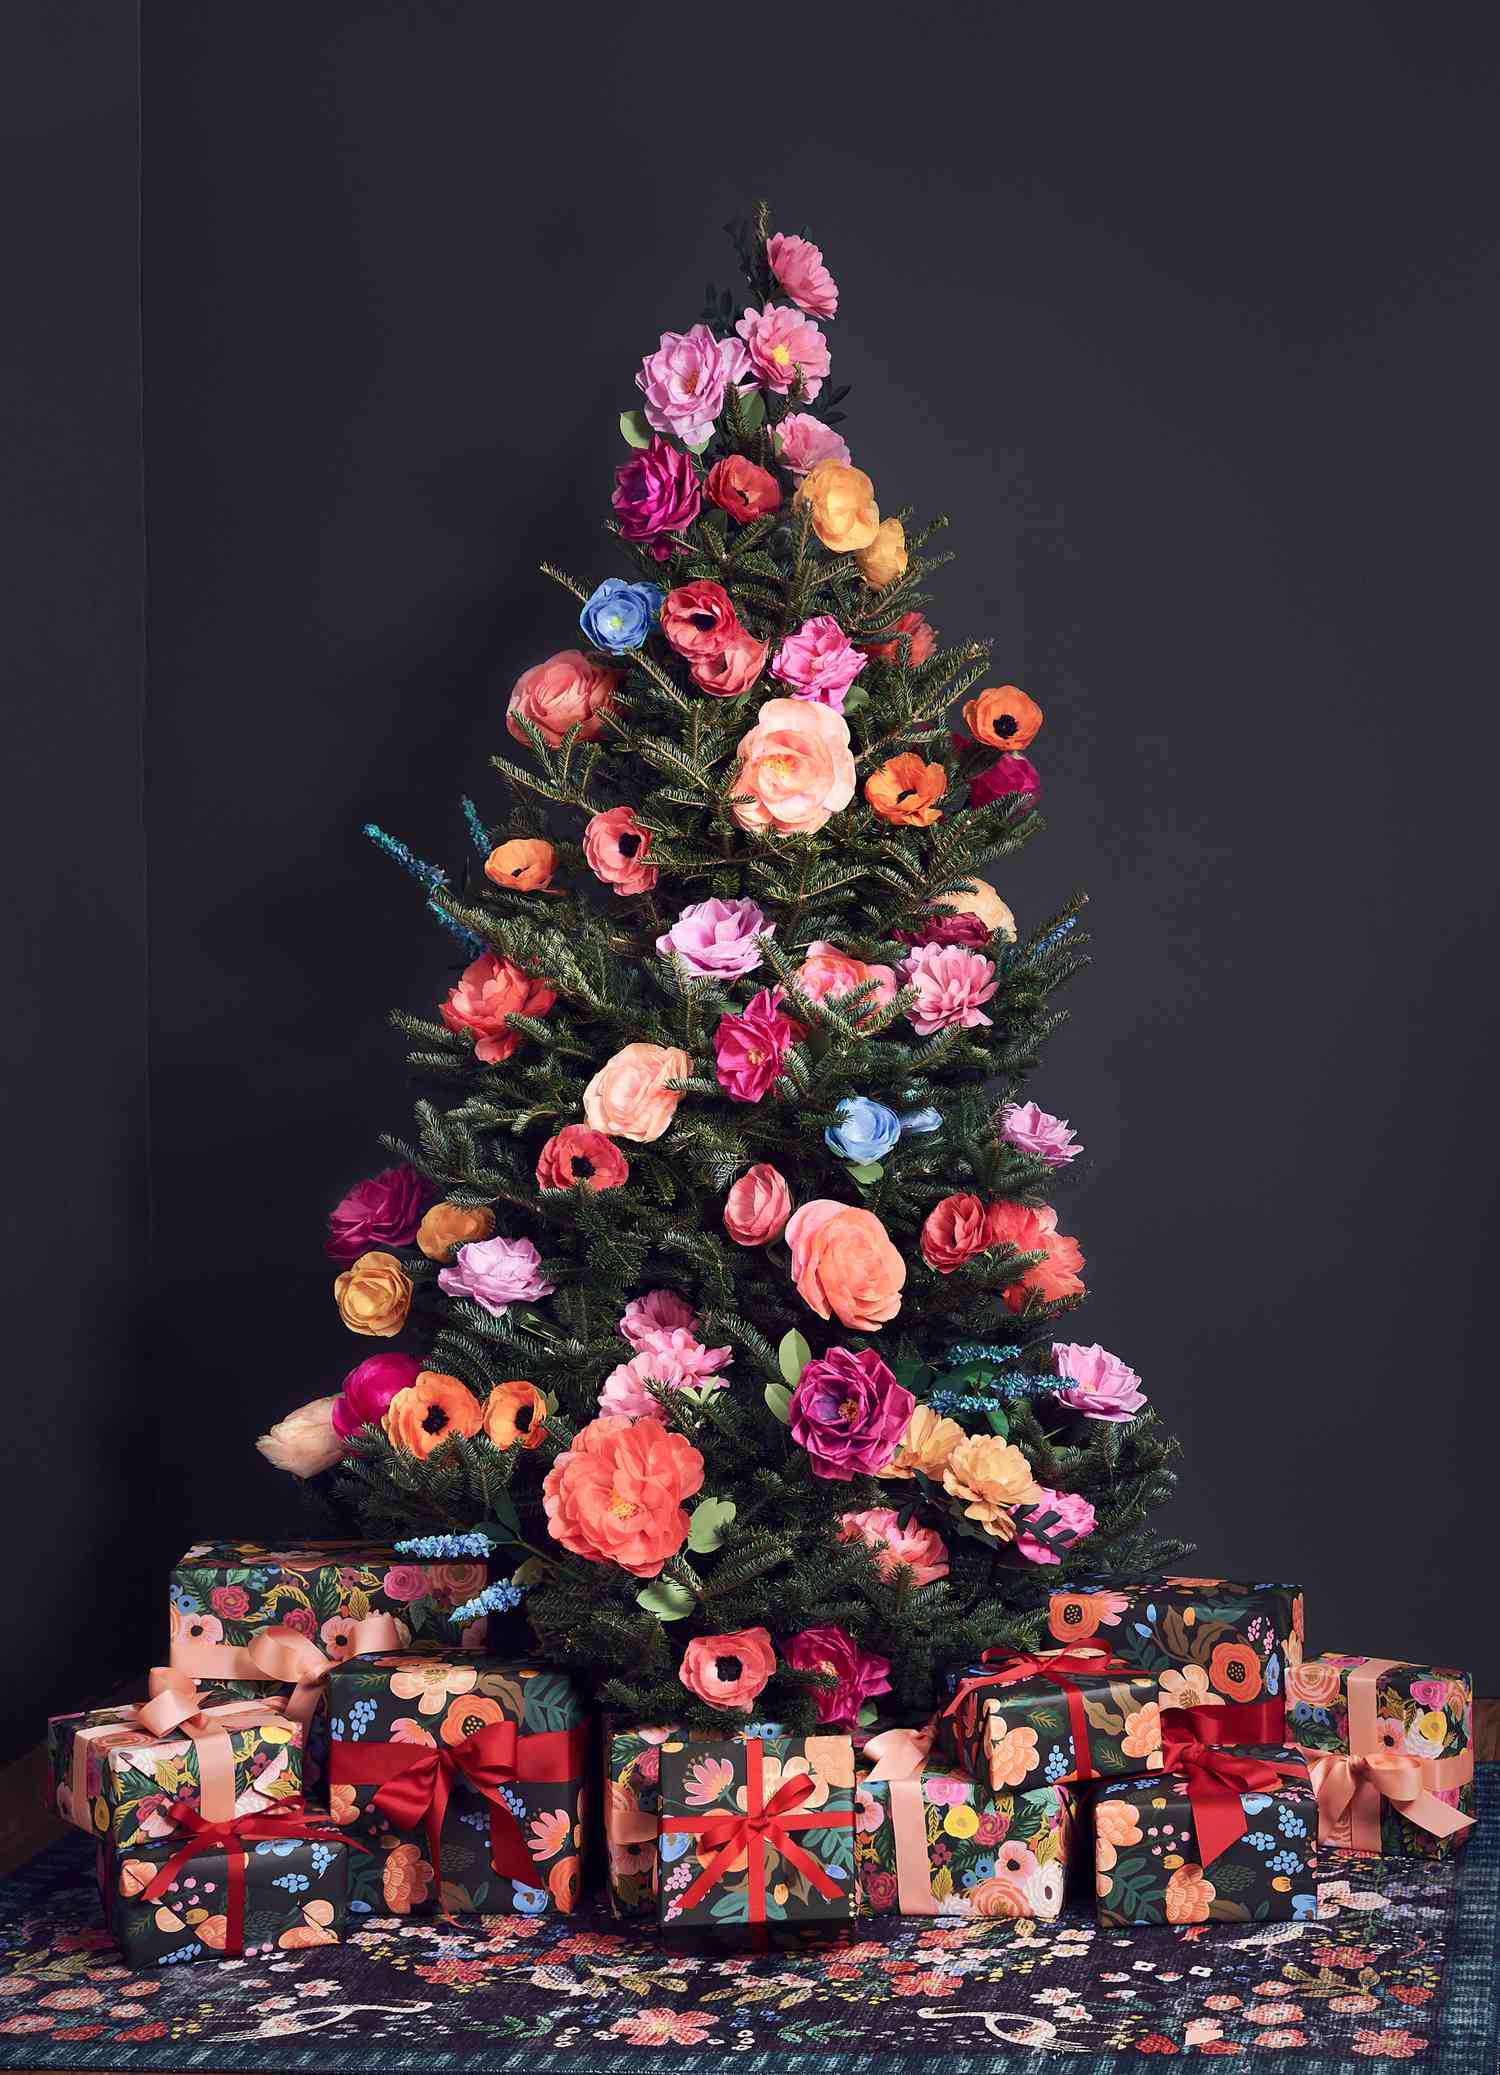 Christmas tree decorated with paper crafts